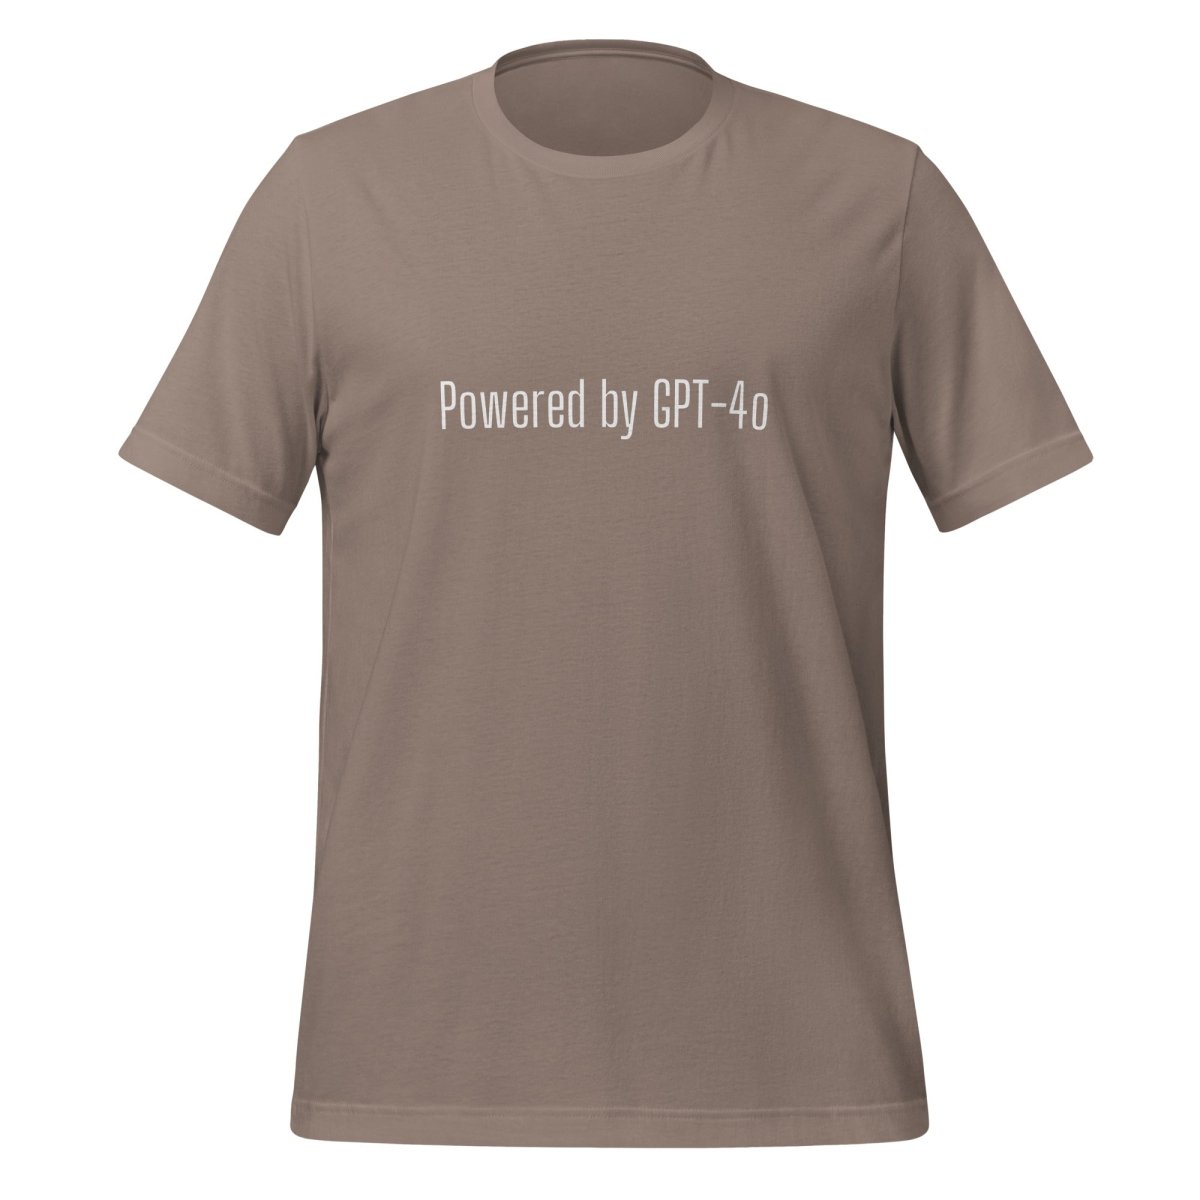 Powered by GPT - 4o T - Shirt 4 (unisex) - Pebble - AI Store